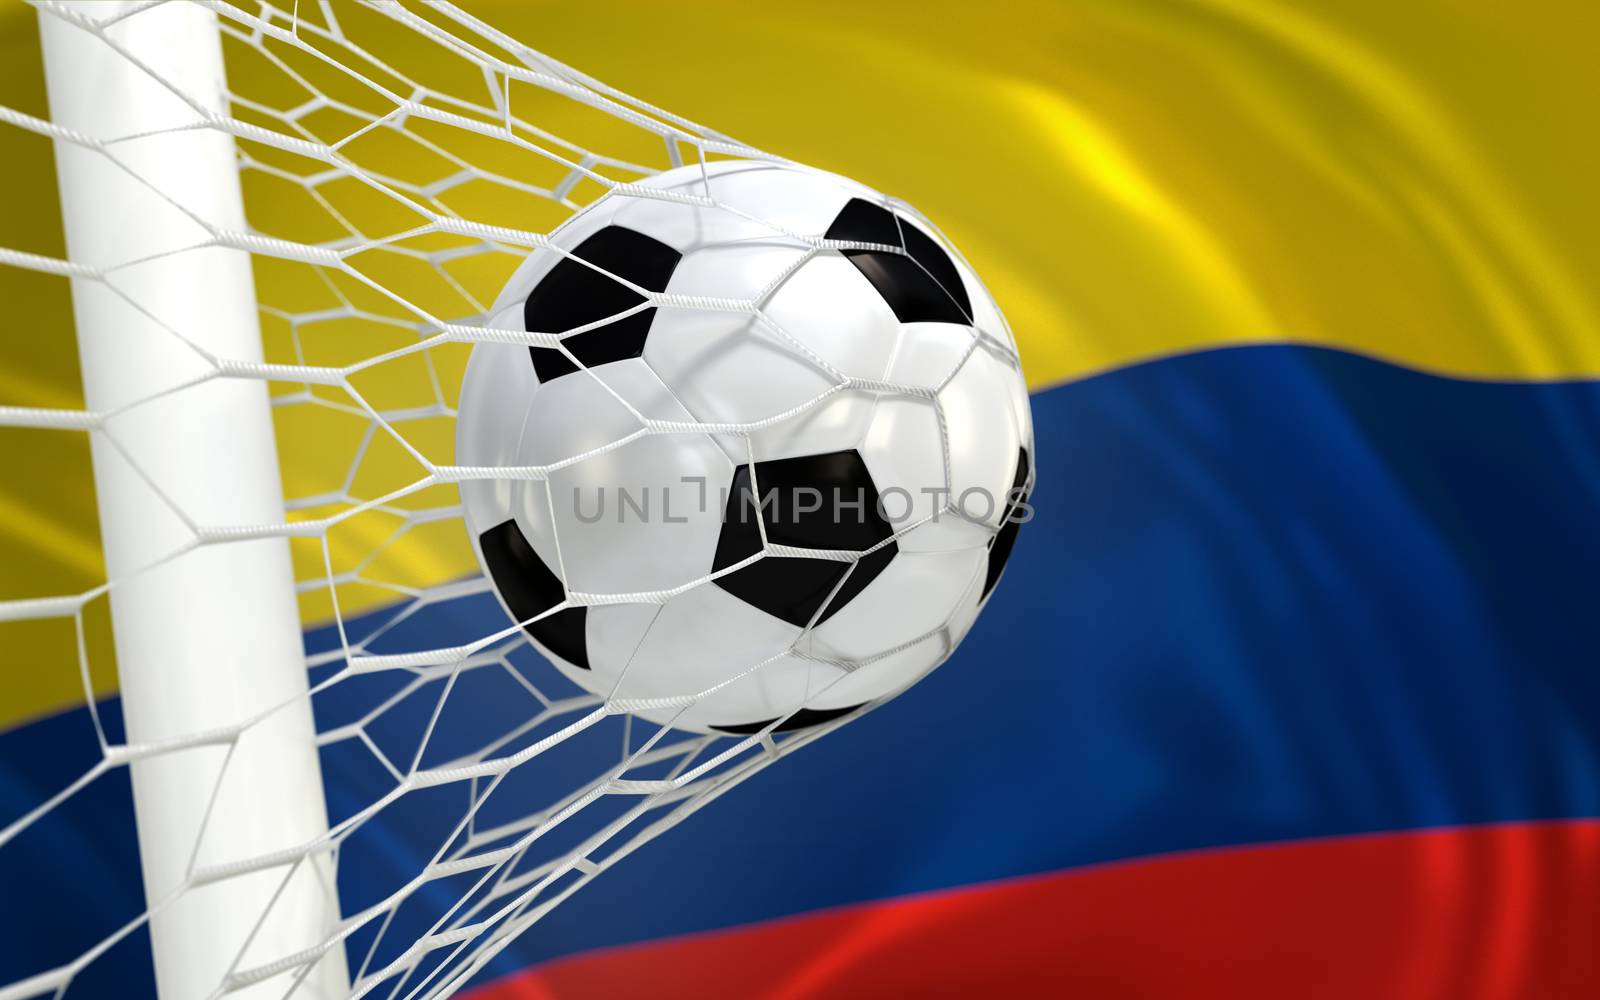 Colombia waving flag and soccer ball in goal net by Barbraford